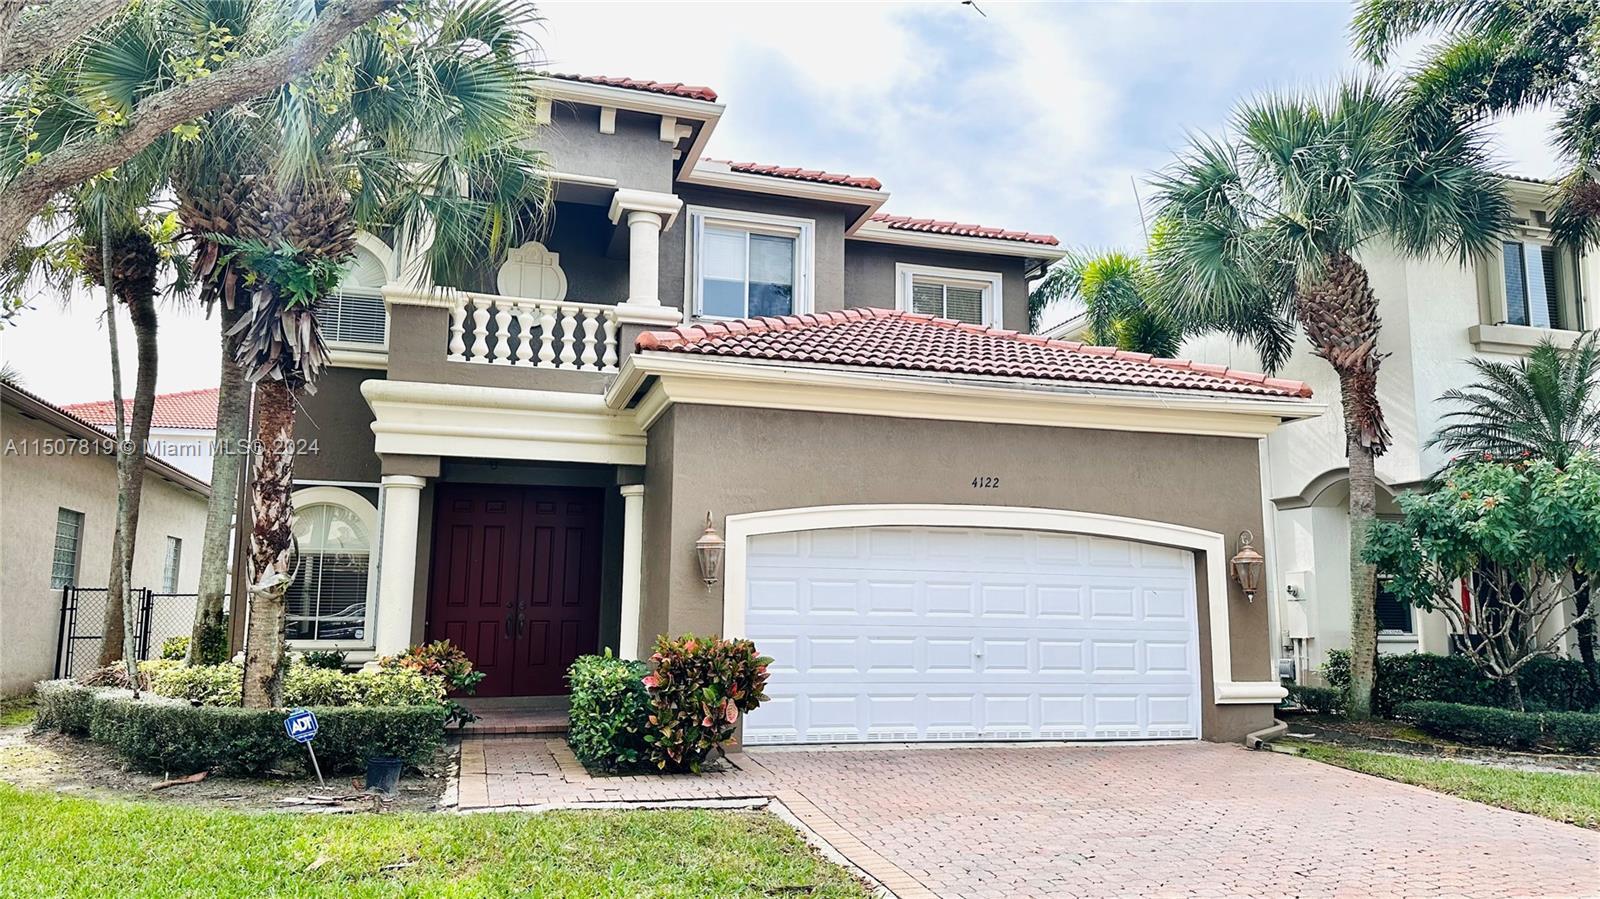 Bright and spacious 3 bed + Den / 2.5 bath single family home in the private gated community of Palm